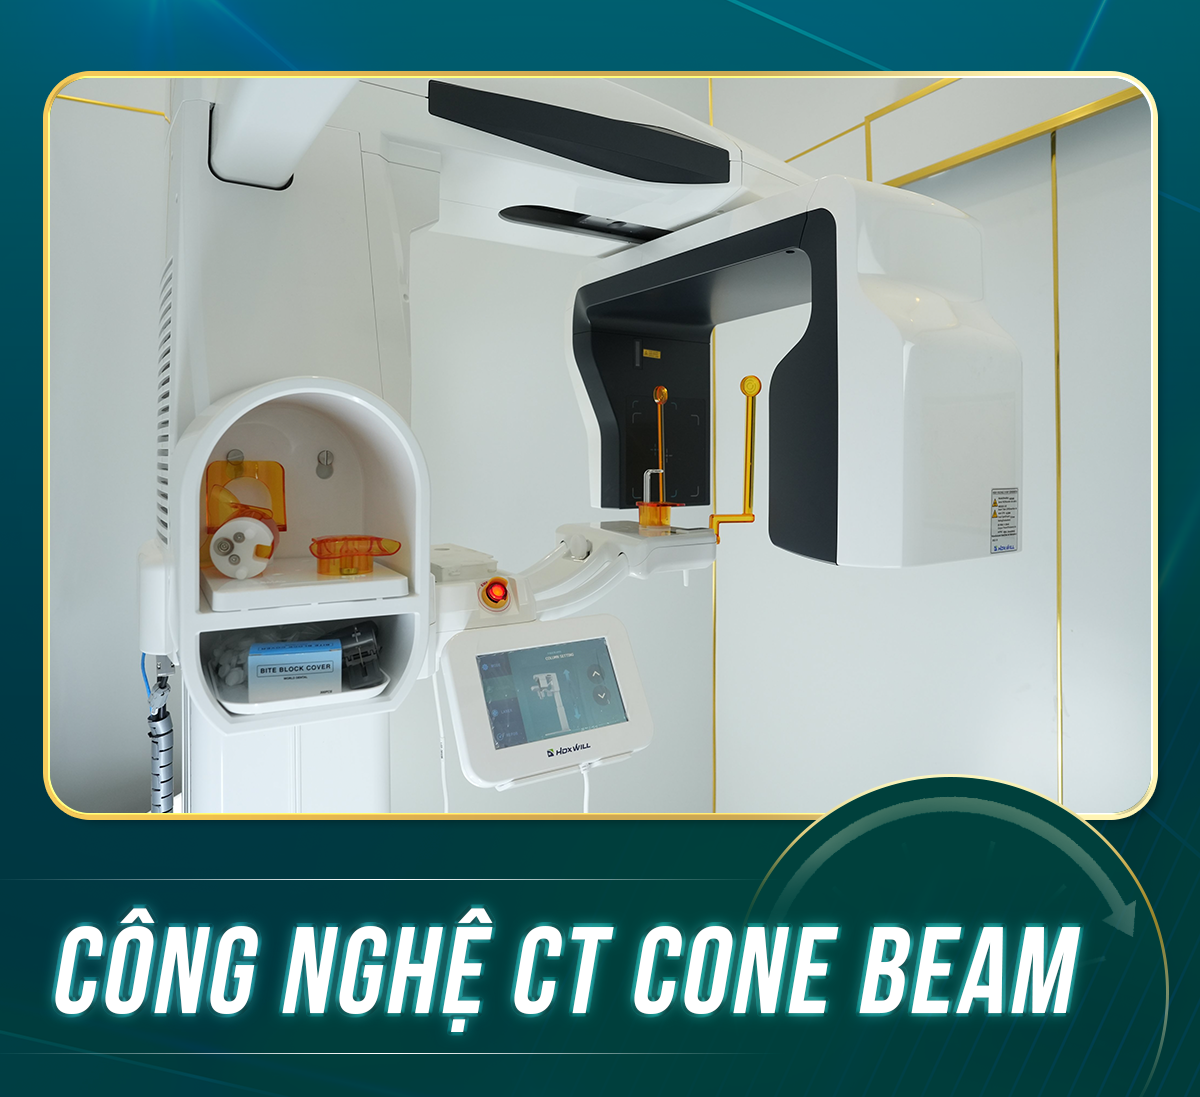 CONG NGHE CT CONE BEAM 1